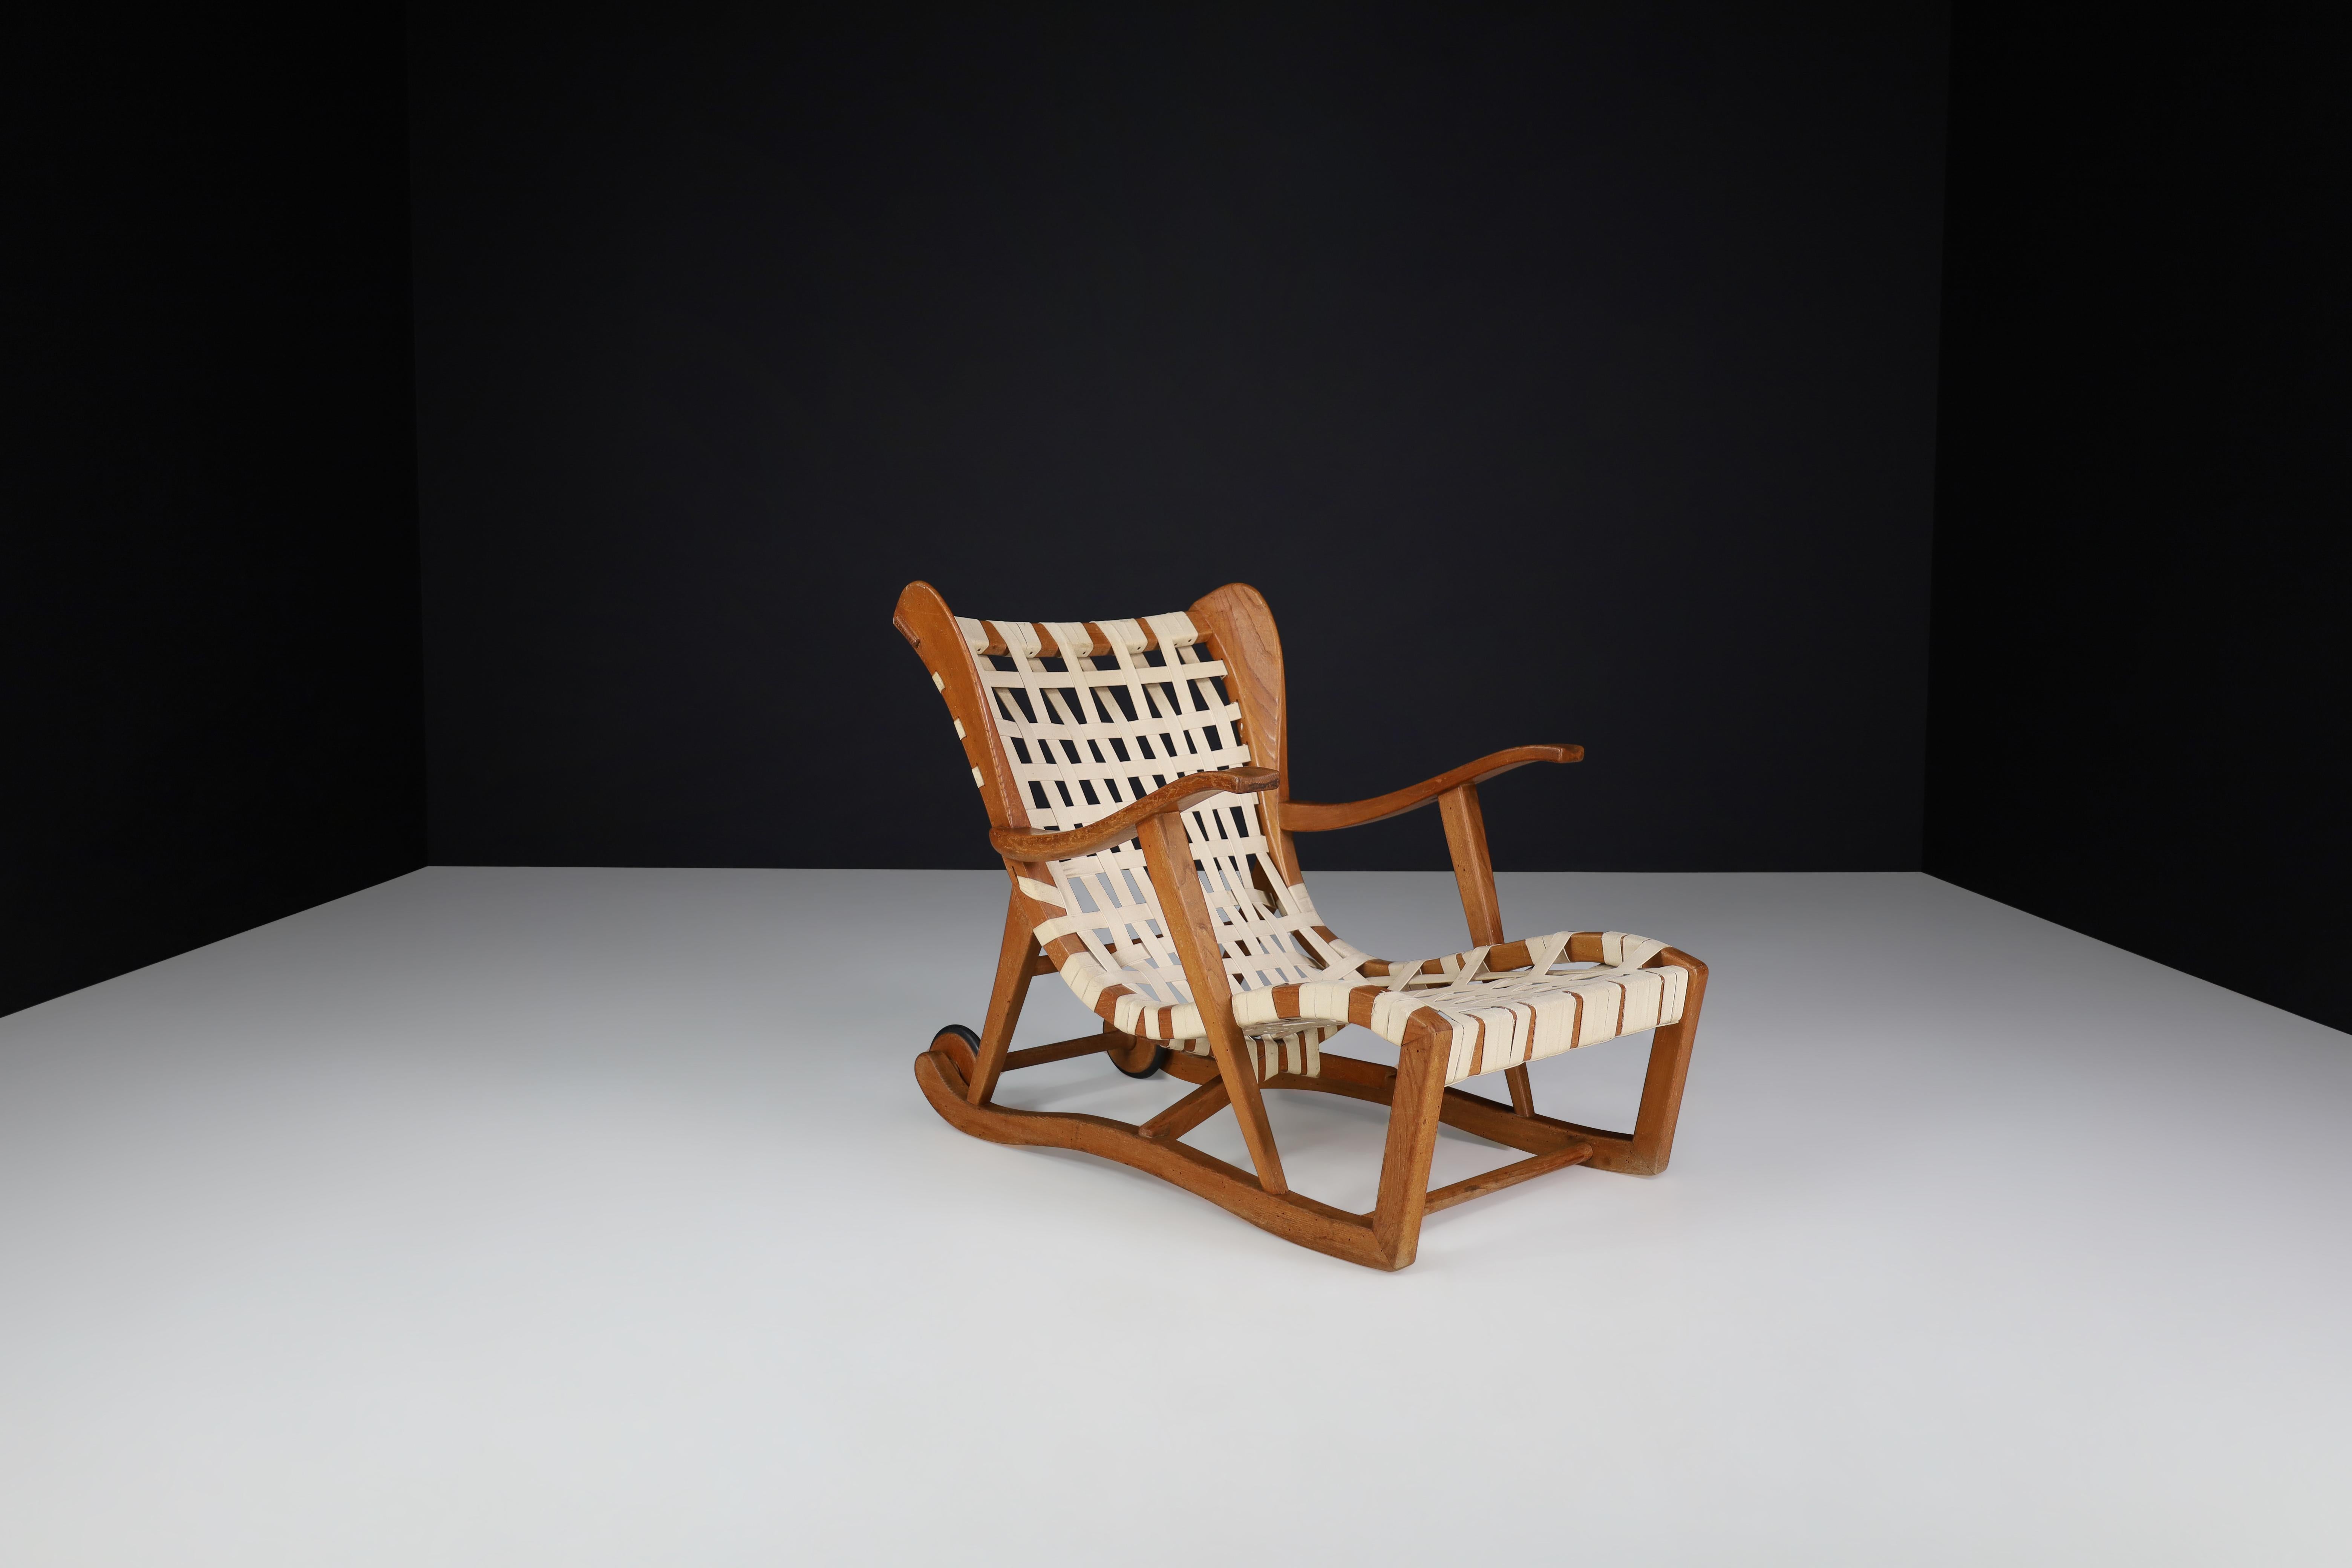 Mid-Century Modern Sculptural Oak Lounge Chair by Guglielmo Pecorini, Italy, the 1950s For Sale